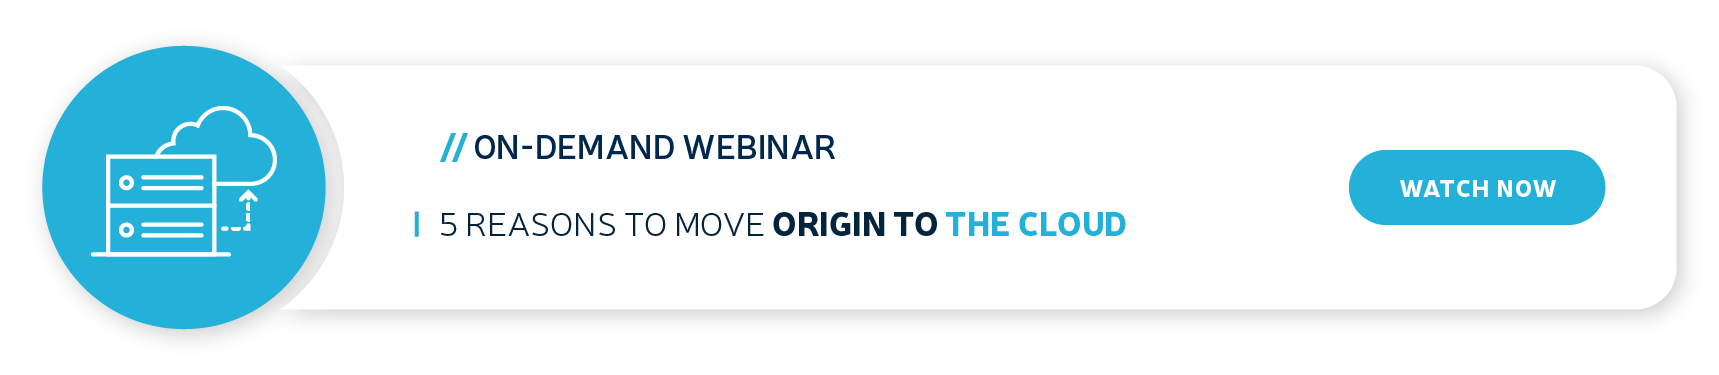 blog-banner-on_demand-webinar-5-reasons-to-move-origin-to-the-cloud